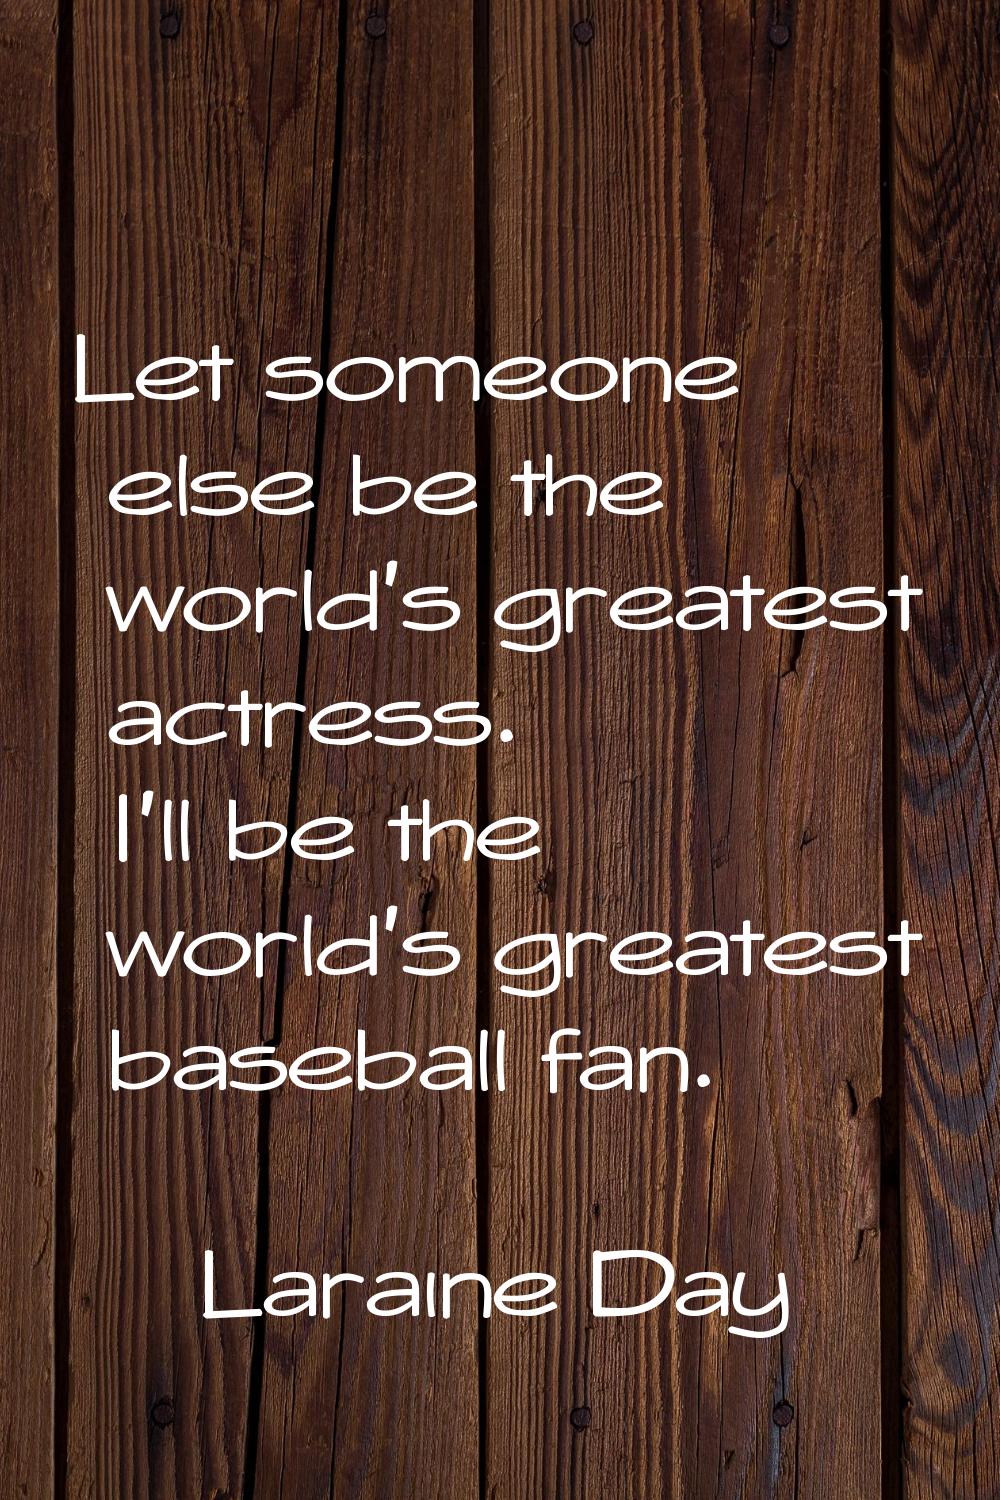 Let someone else be the world's greatest actress. I'll be the world's greatest baseball fan.